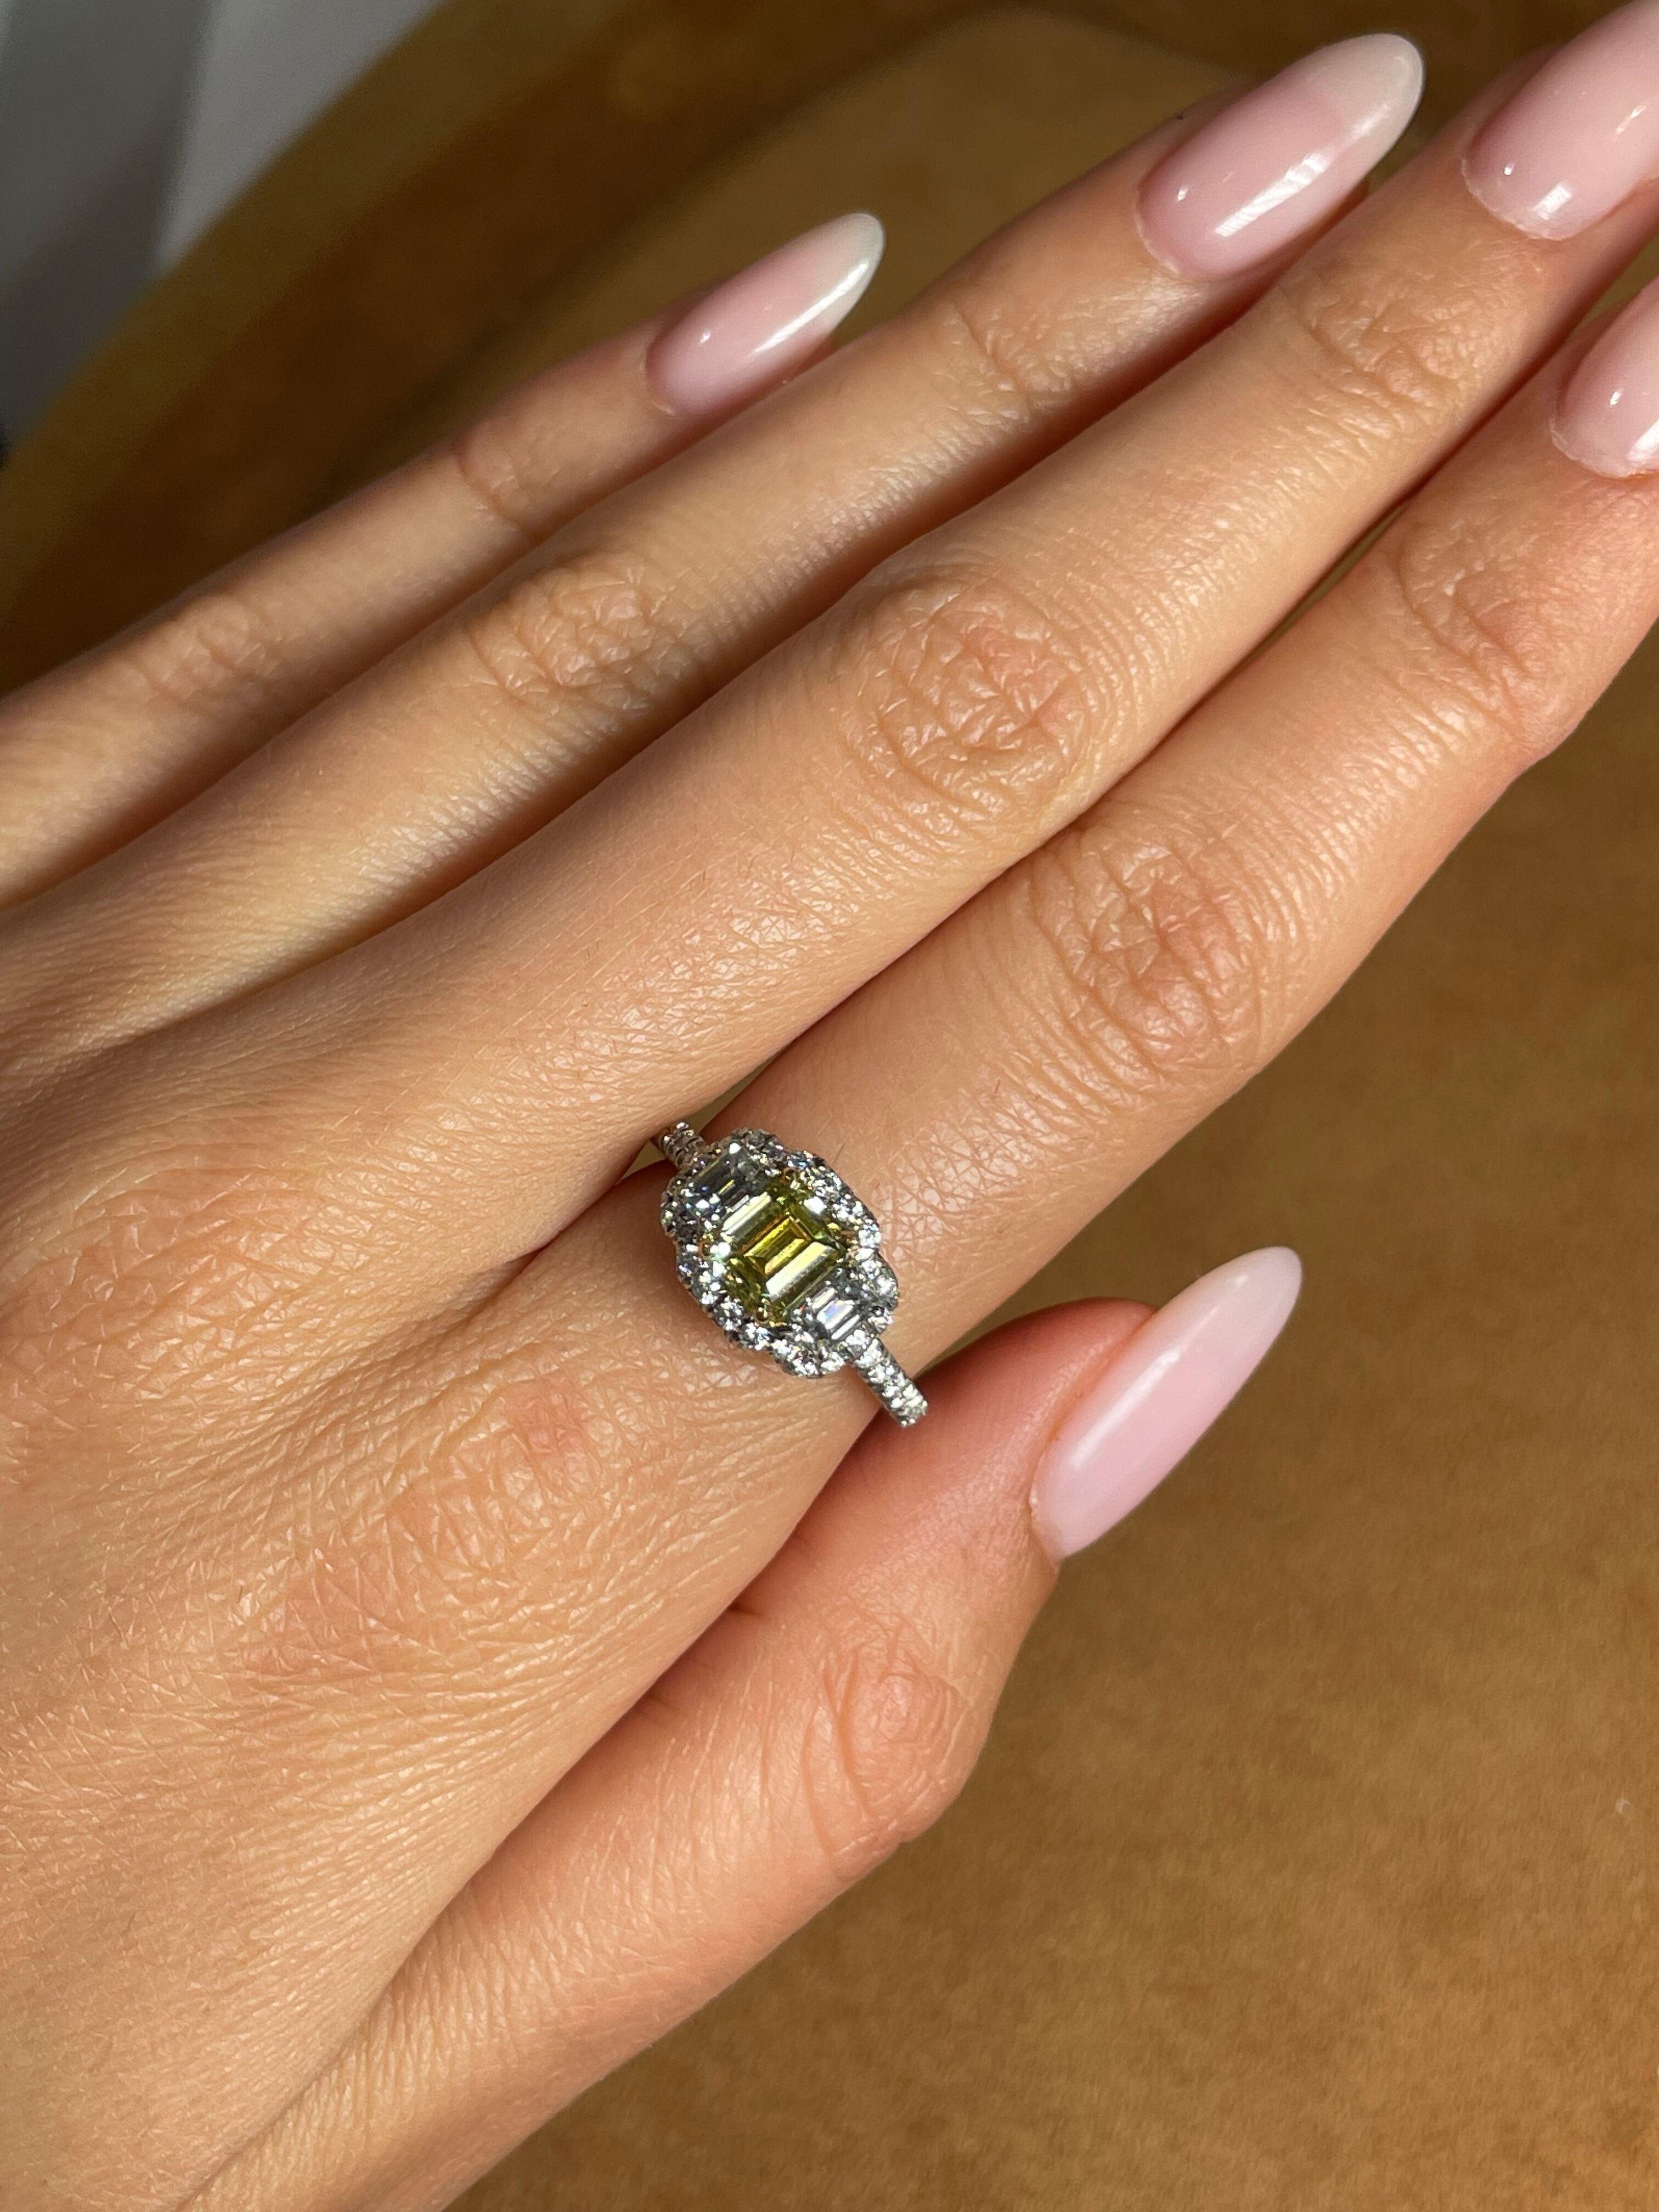 Emerald Cut 1 Carat Fancy Intense Yellow Diamond Engagement 3 Stones Ring, GIA Certified For Sale